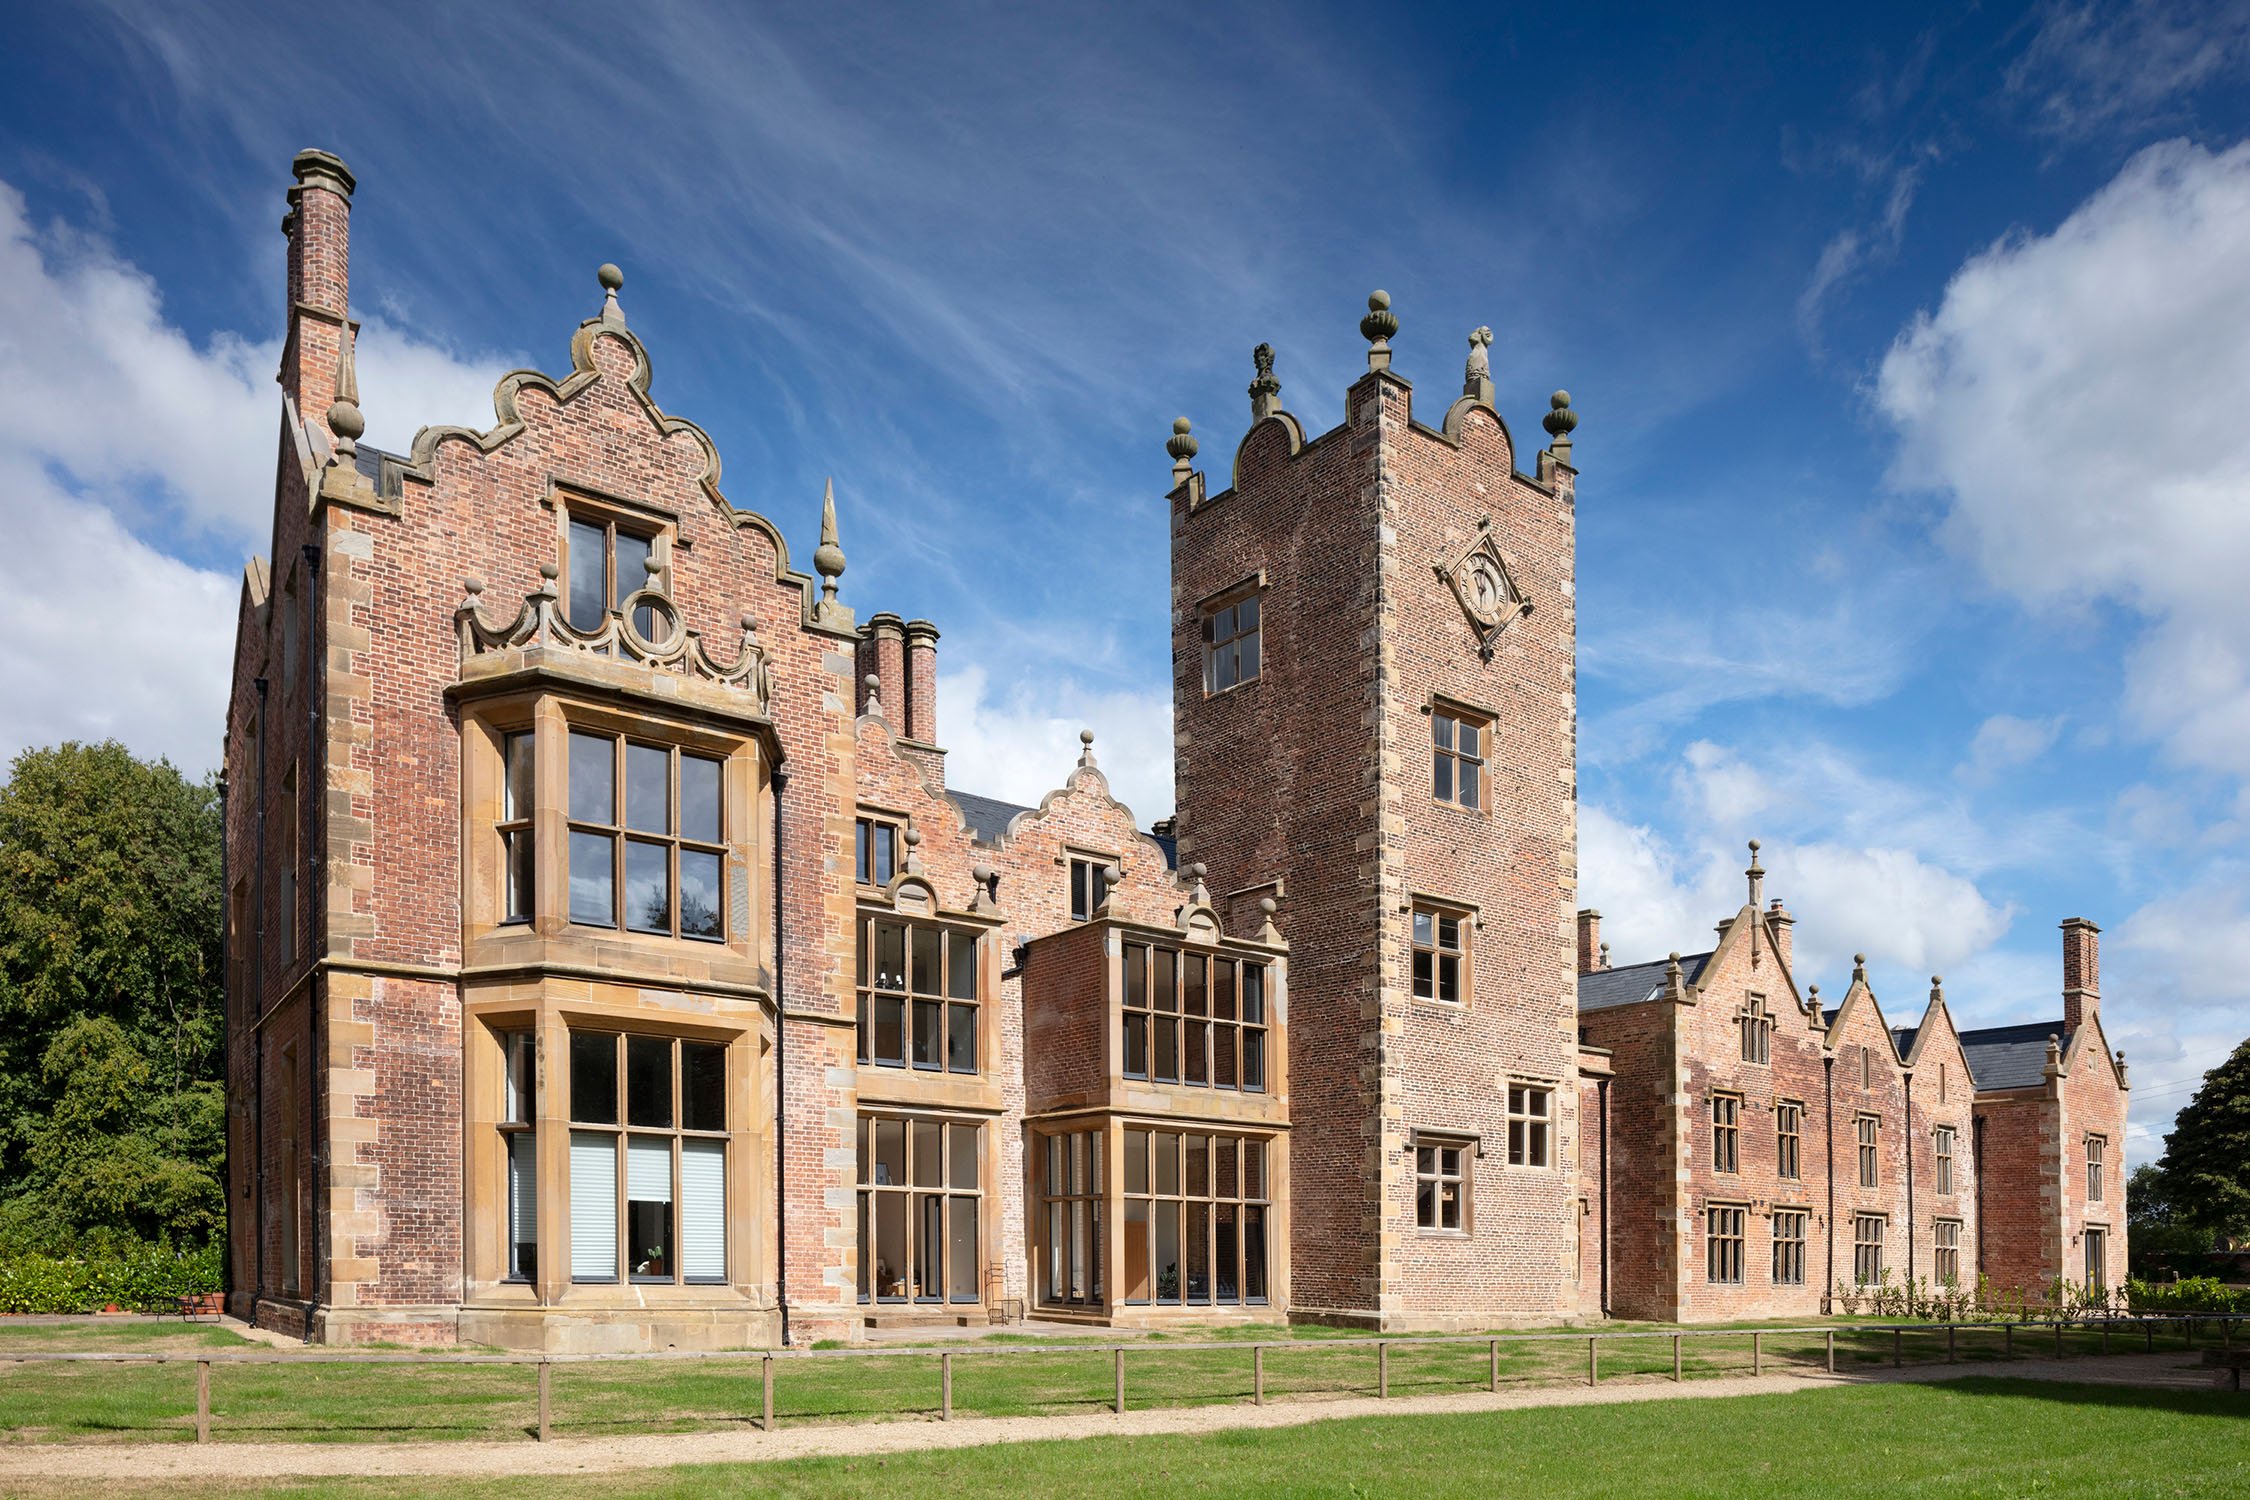 A medium-sized stately home built in red brick